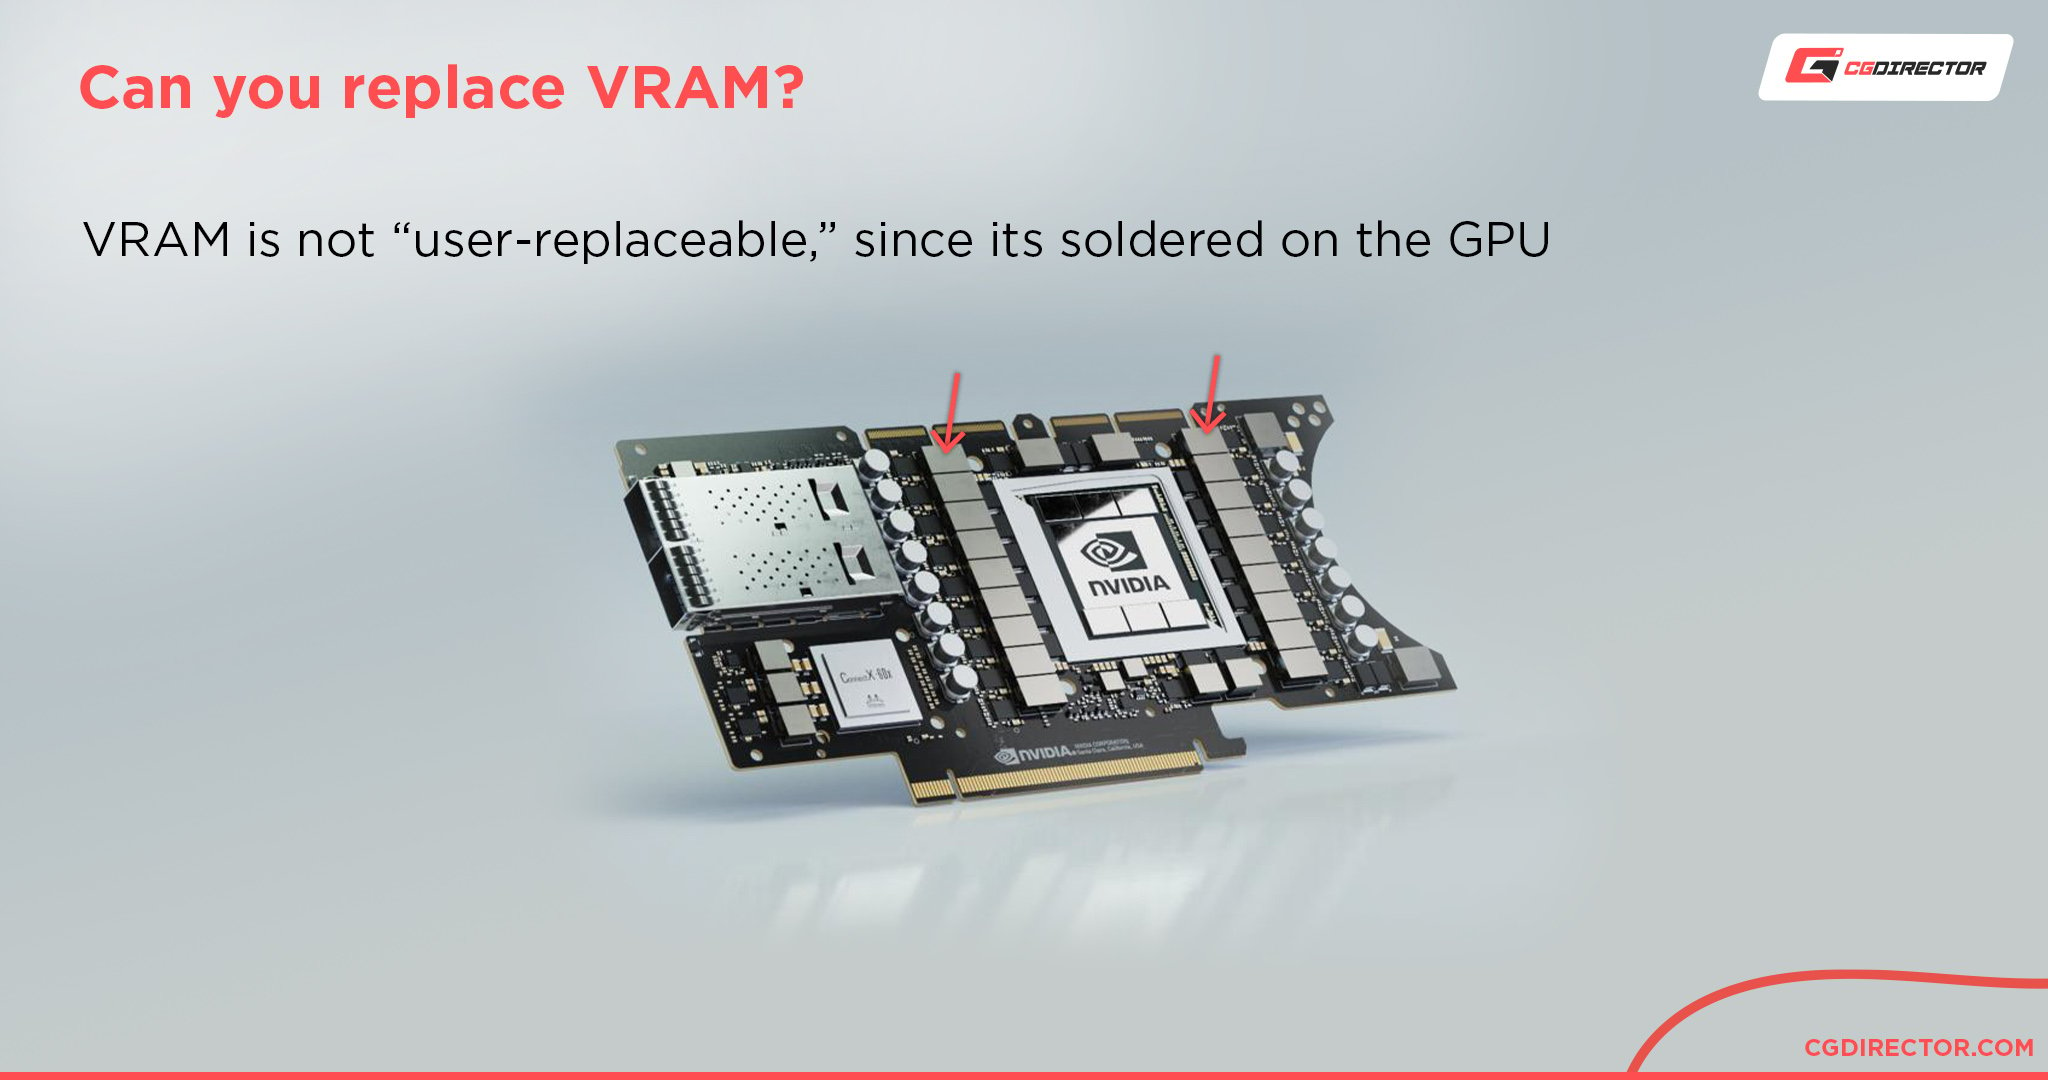 Can you replace VRAM